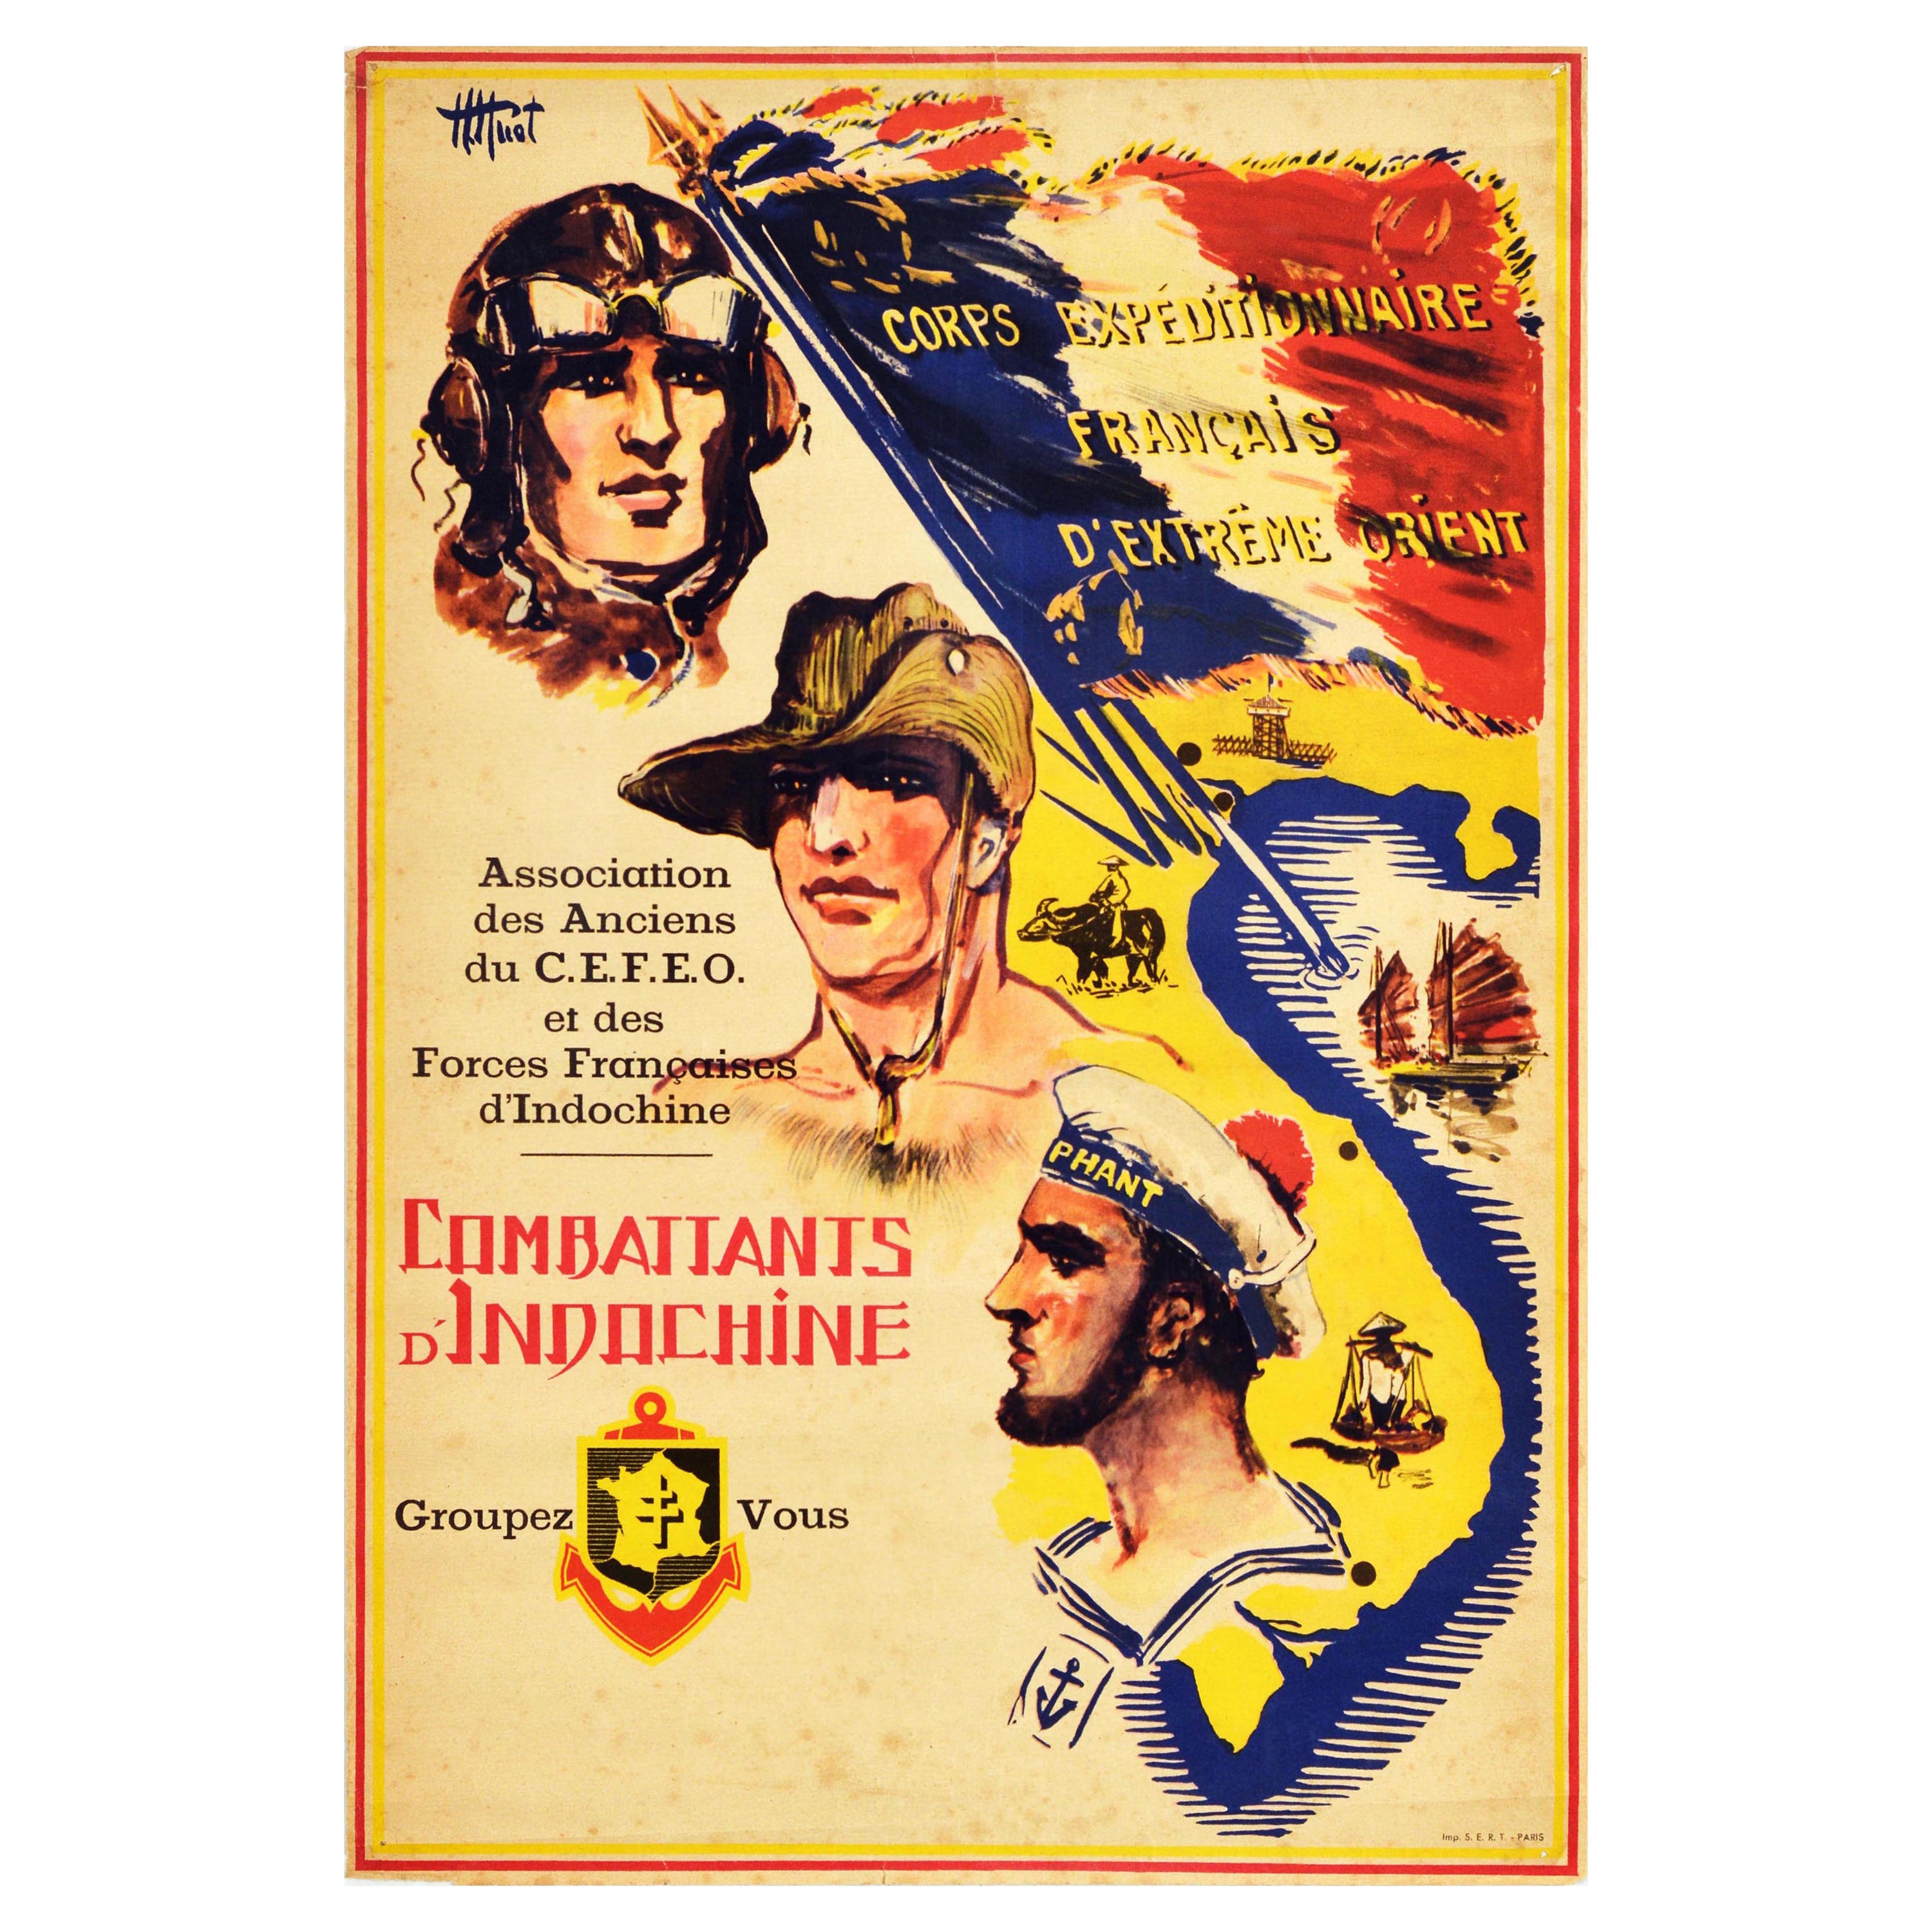 Original Vintage Propaganda Poster Combattants Indochine French Corps Indochina For Sale